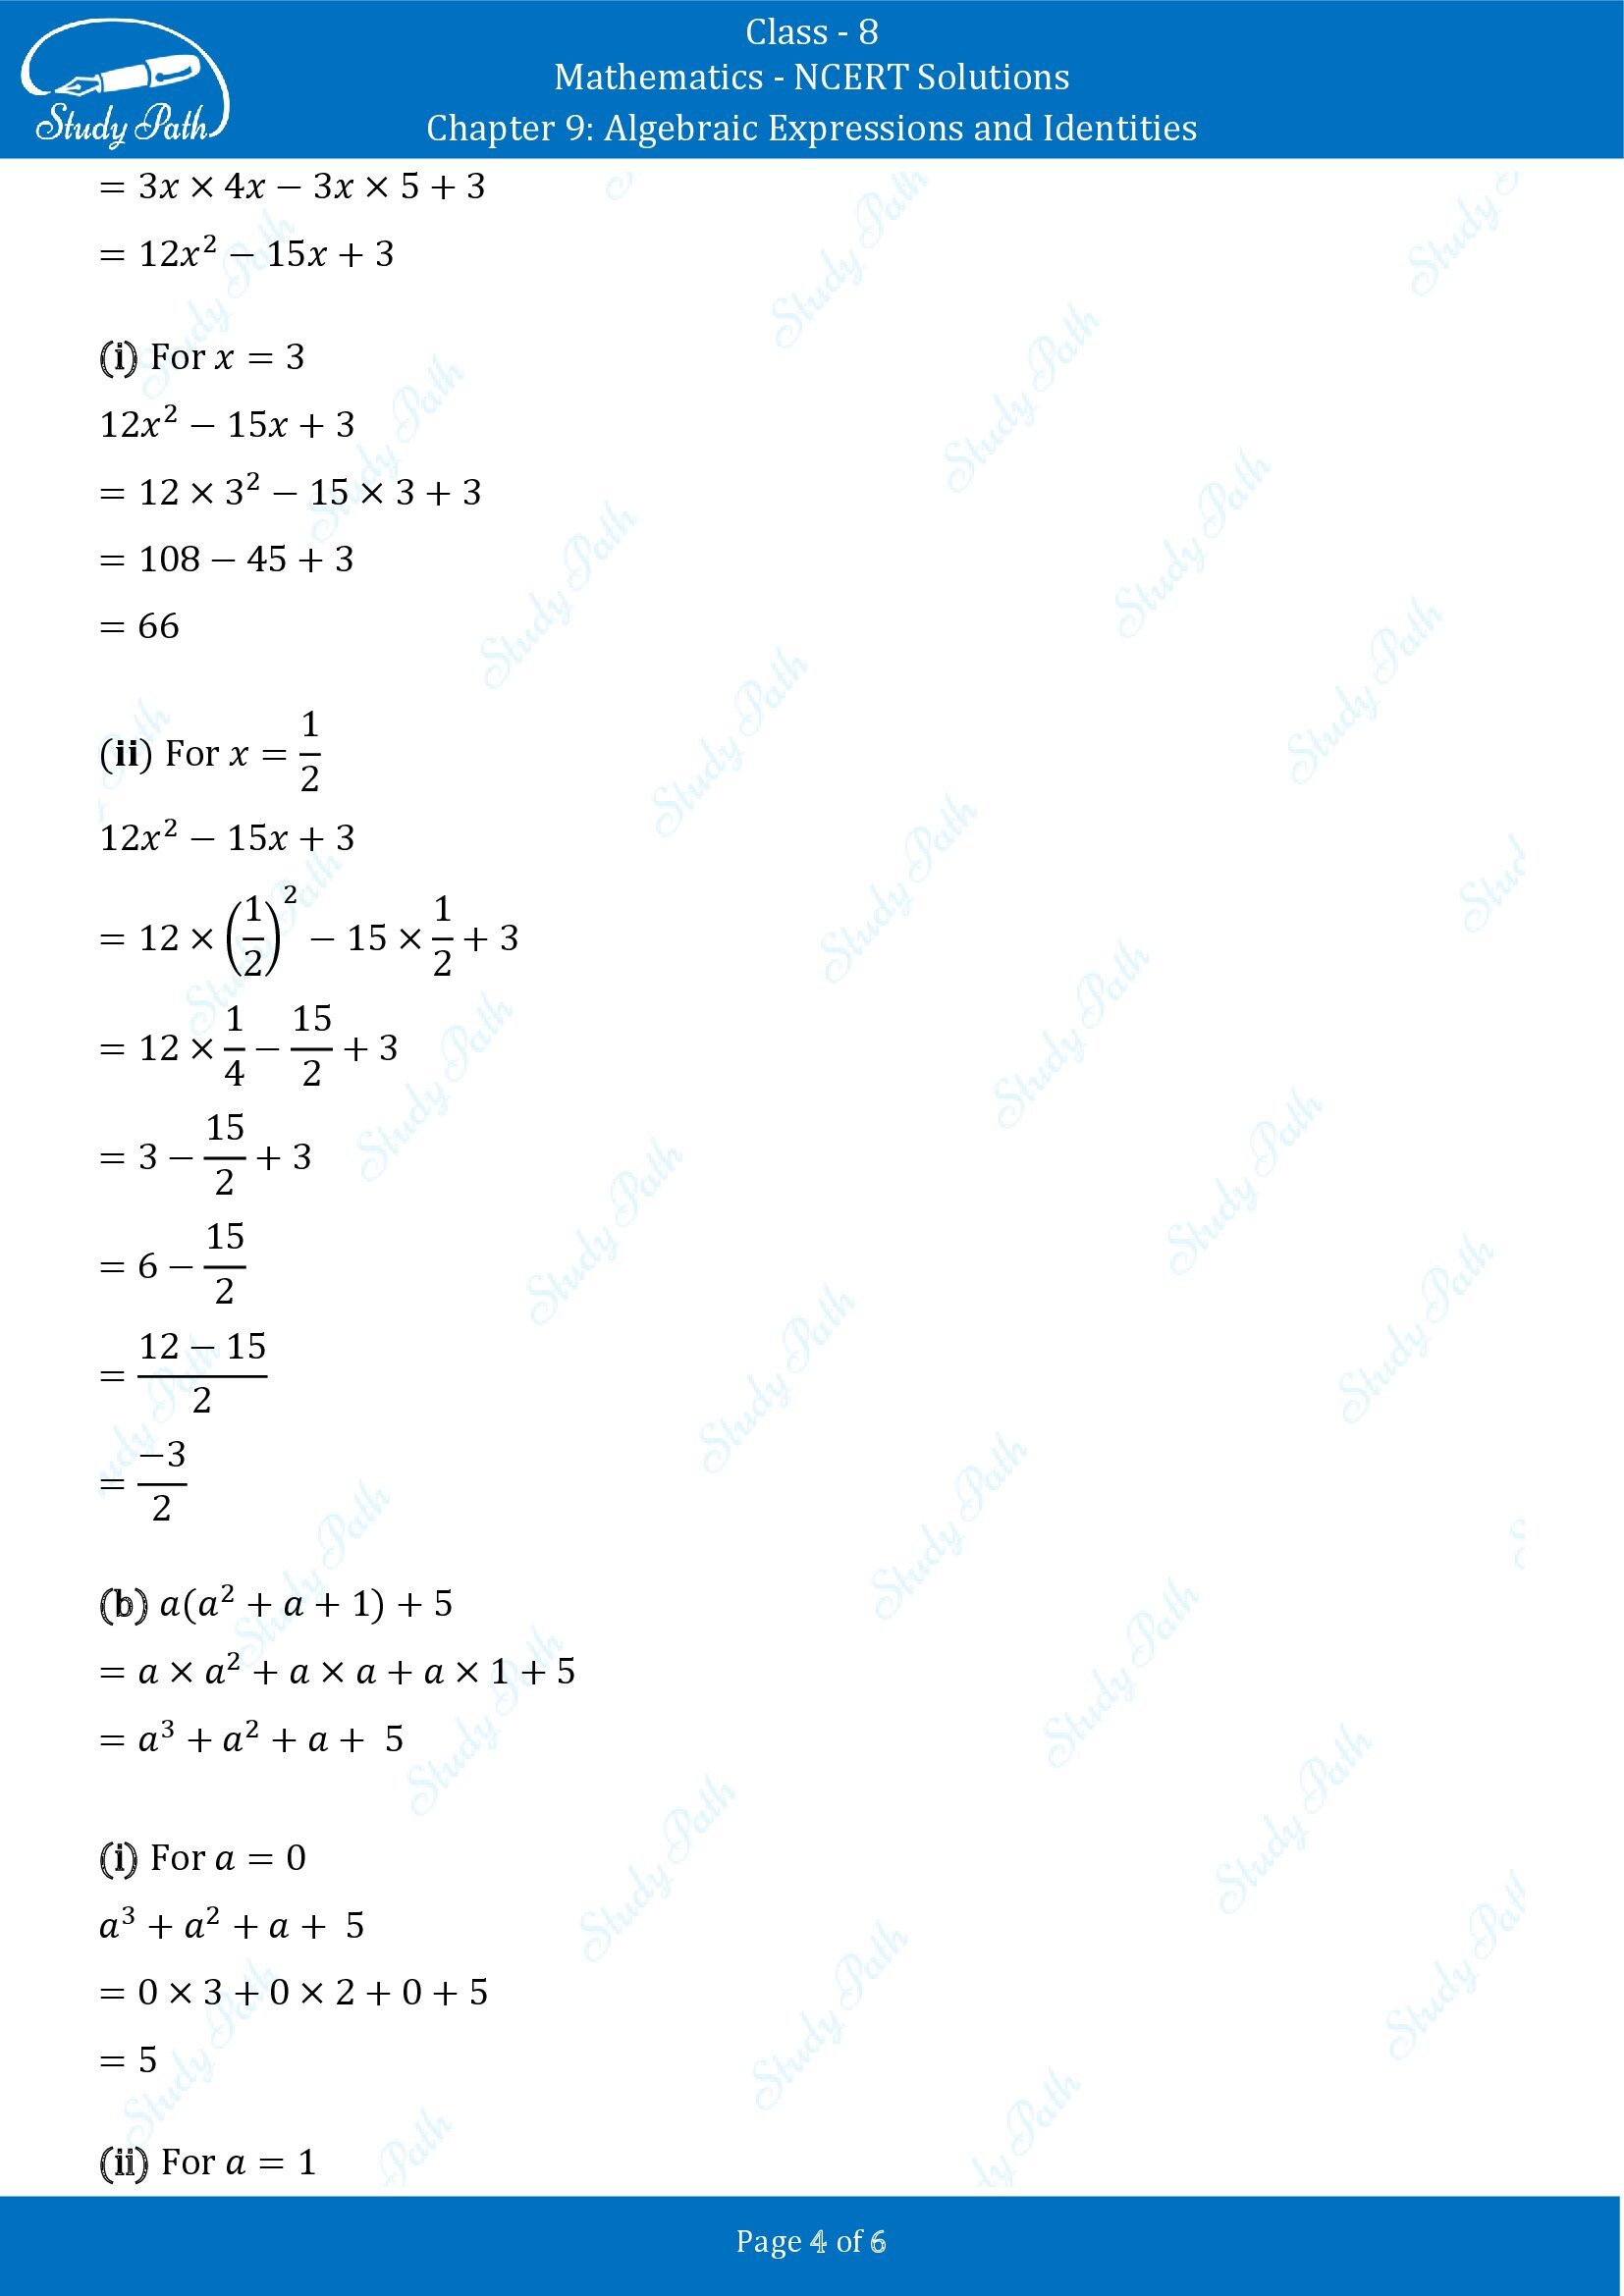 NCERT Solutions for Class 8 Maths Chapter 9 Algebraic Expressions and Identities Exercise 9.3 00004